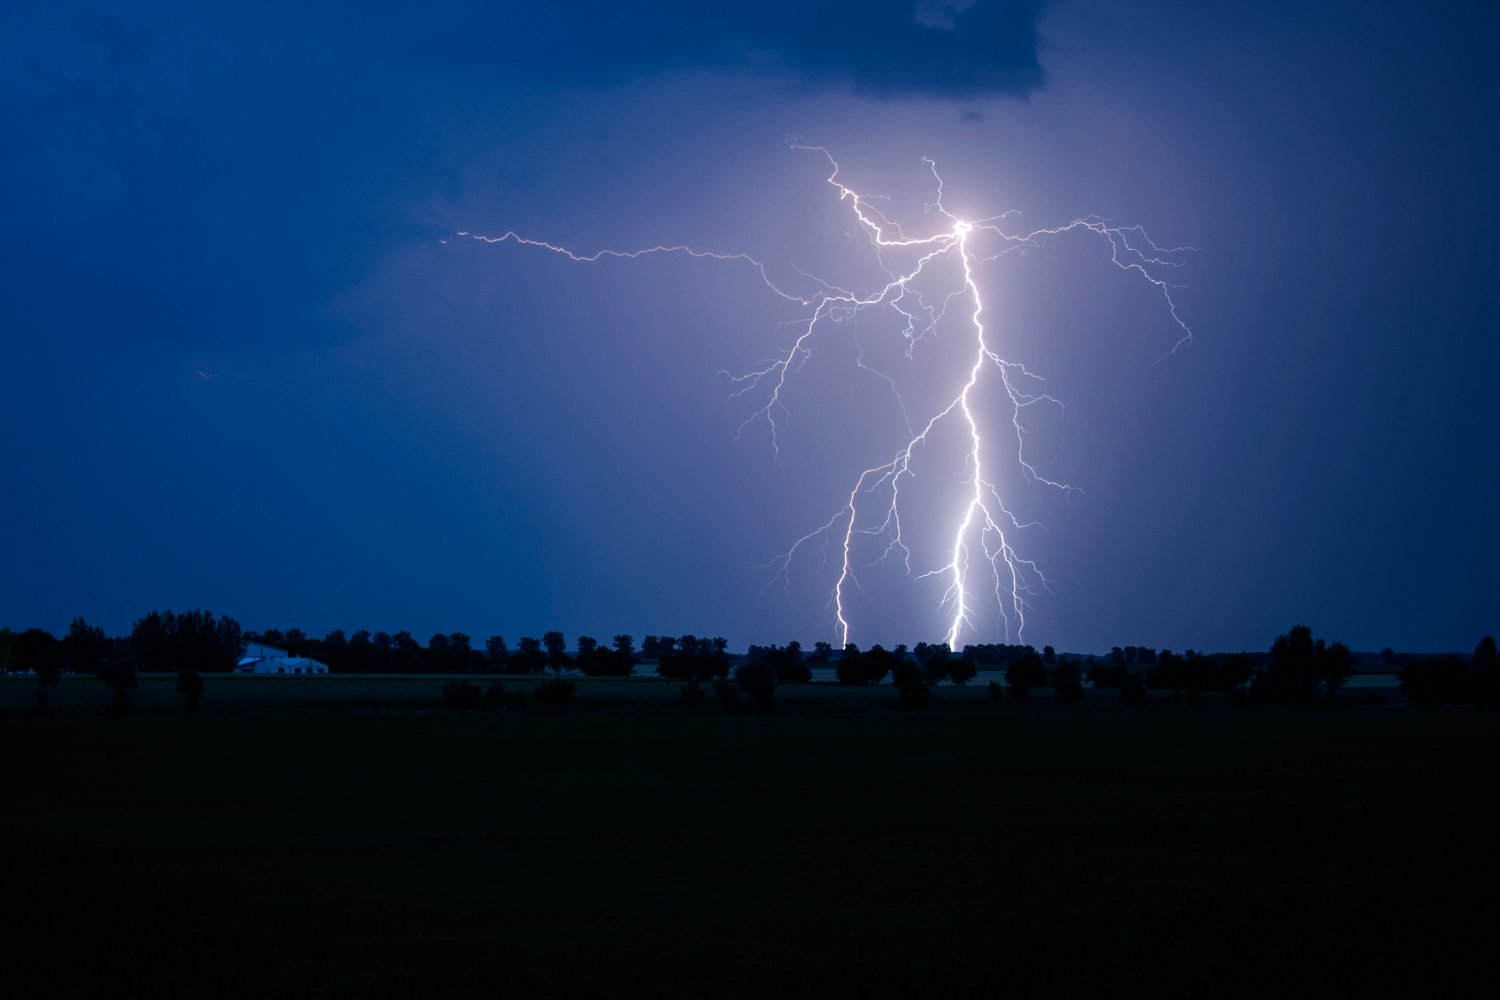 Bitcoin’s Lightning Network Is Getting Its Own Hacker Camp